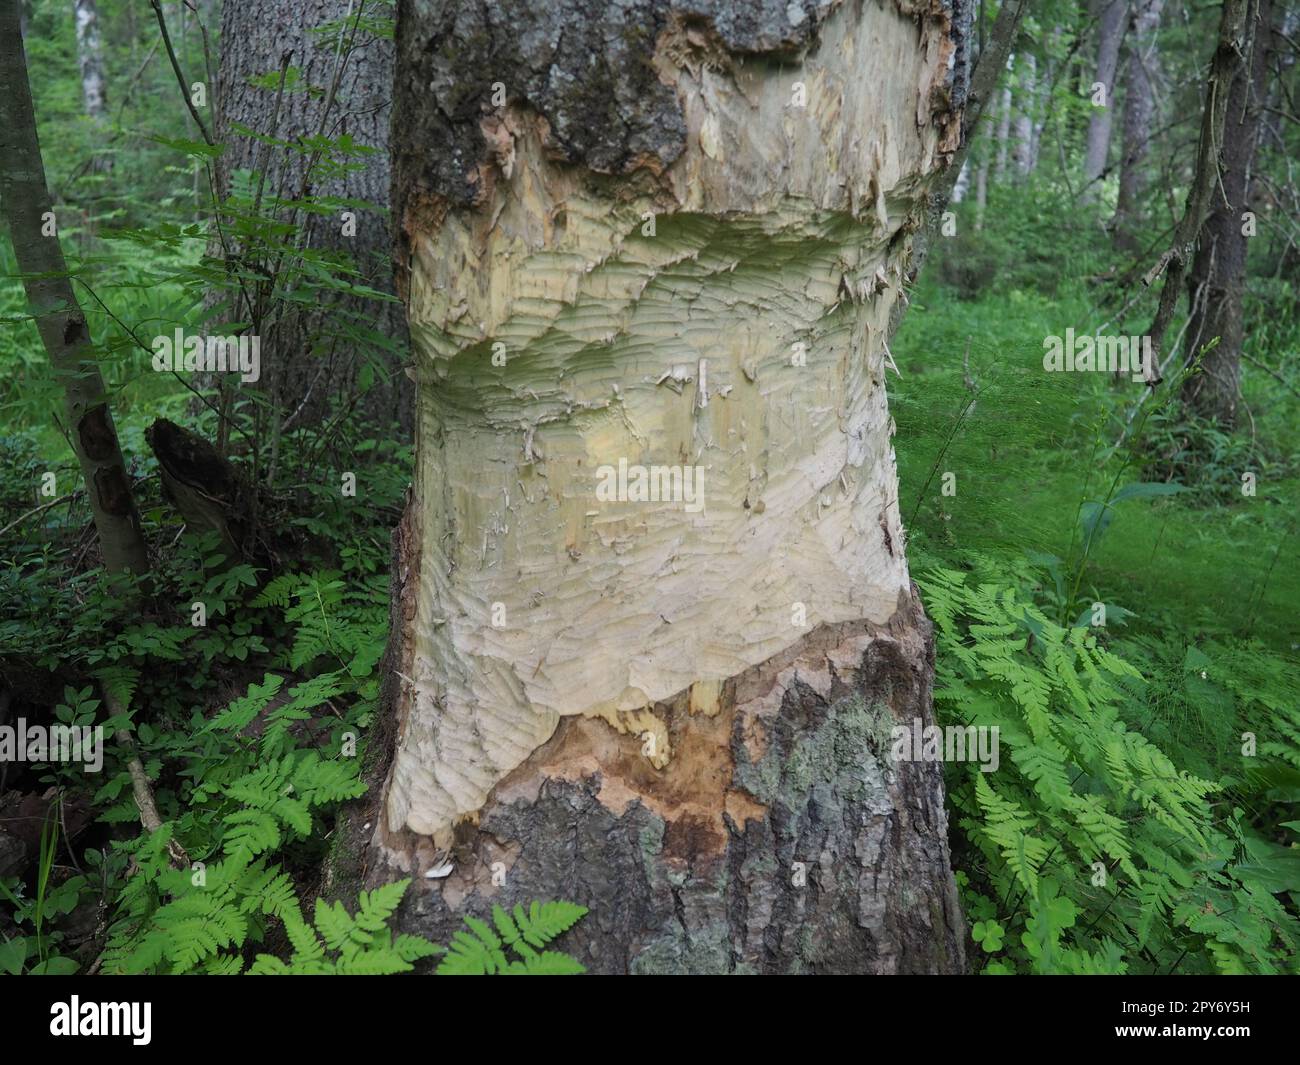 A tree gnawed by a beaver. Damaged bark and wood. The work of a beaver for the construction of a dam. Taiga, Karelia, Russia. Hunting and fishing. Life activity of European forest animals. Stock Photo